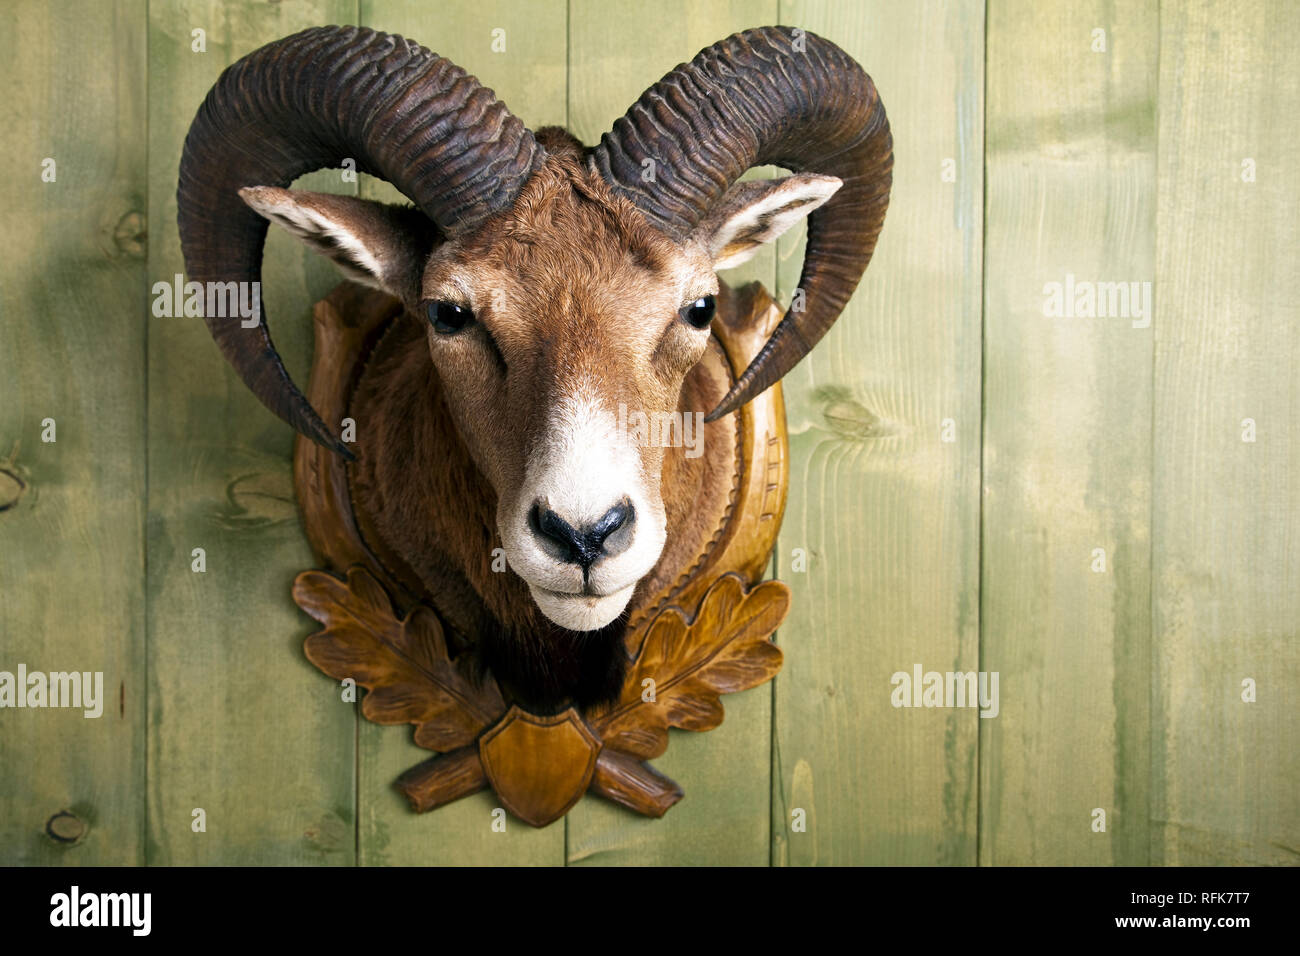 Prepared mouflon hanging on a wooden wall Stock Photo